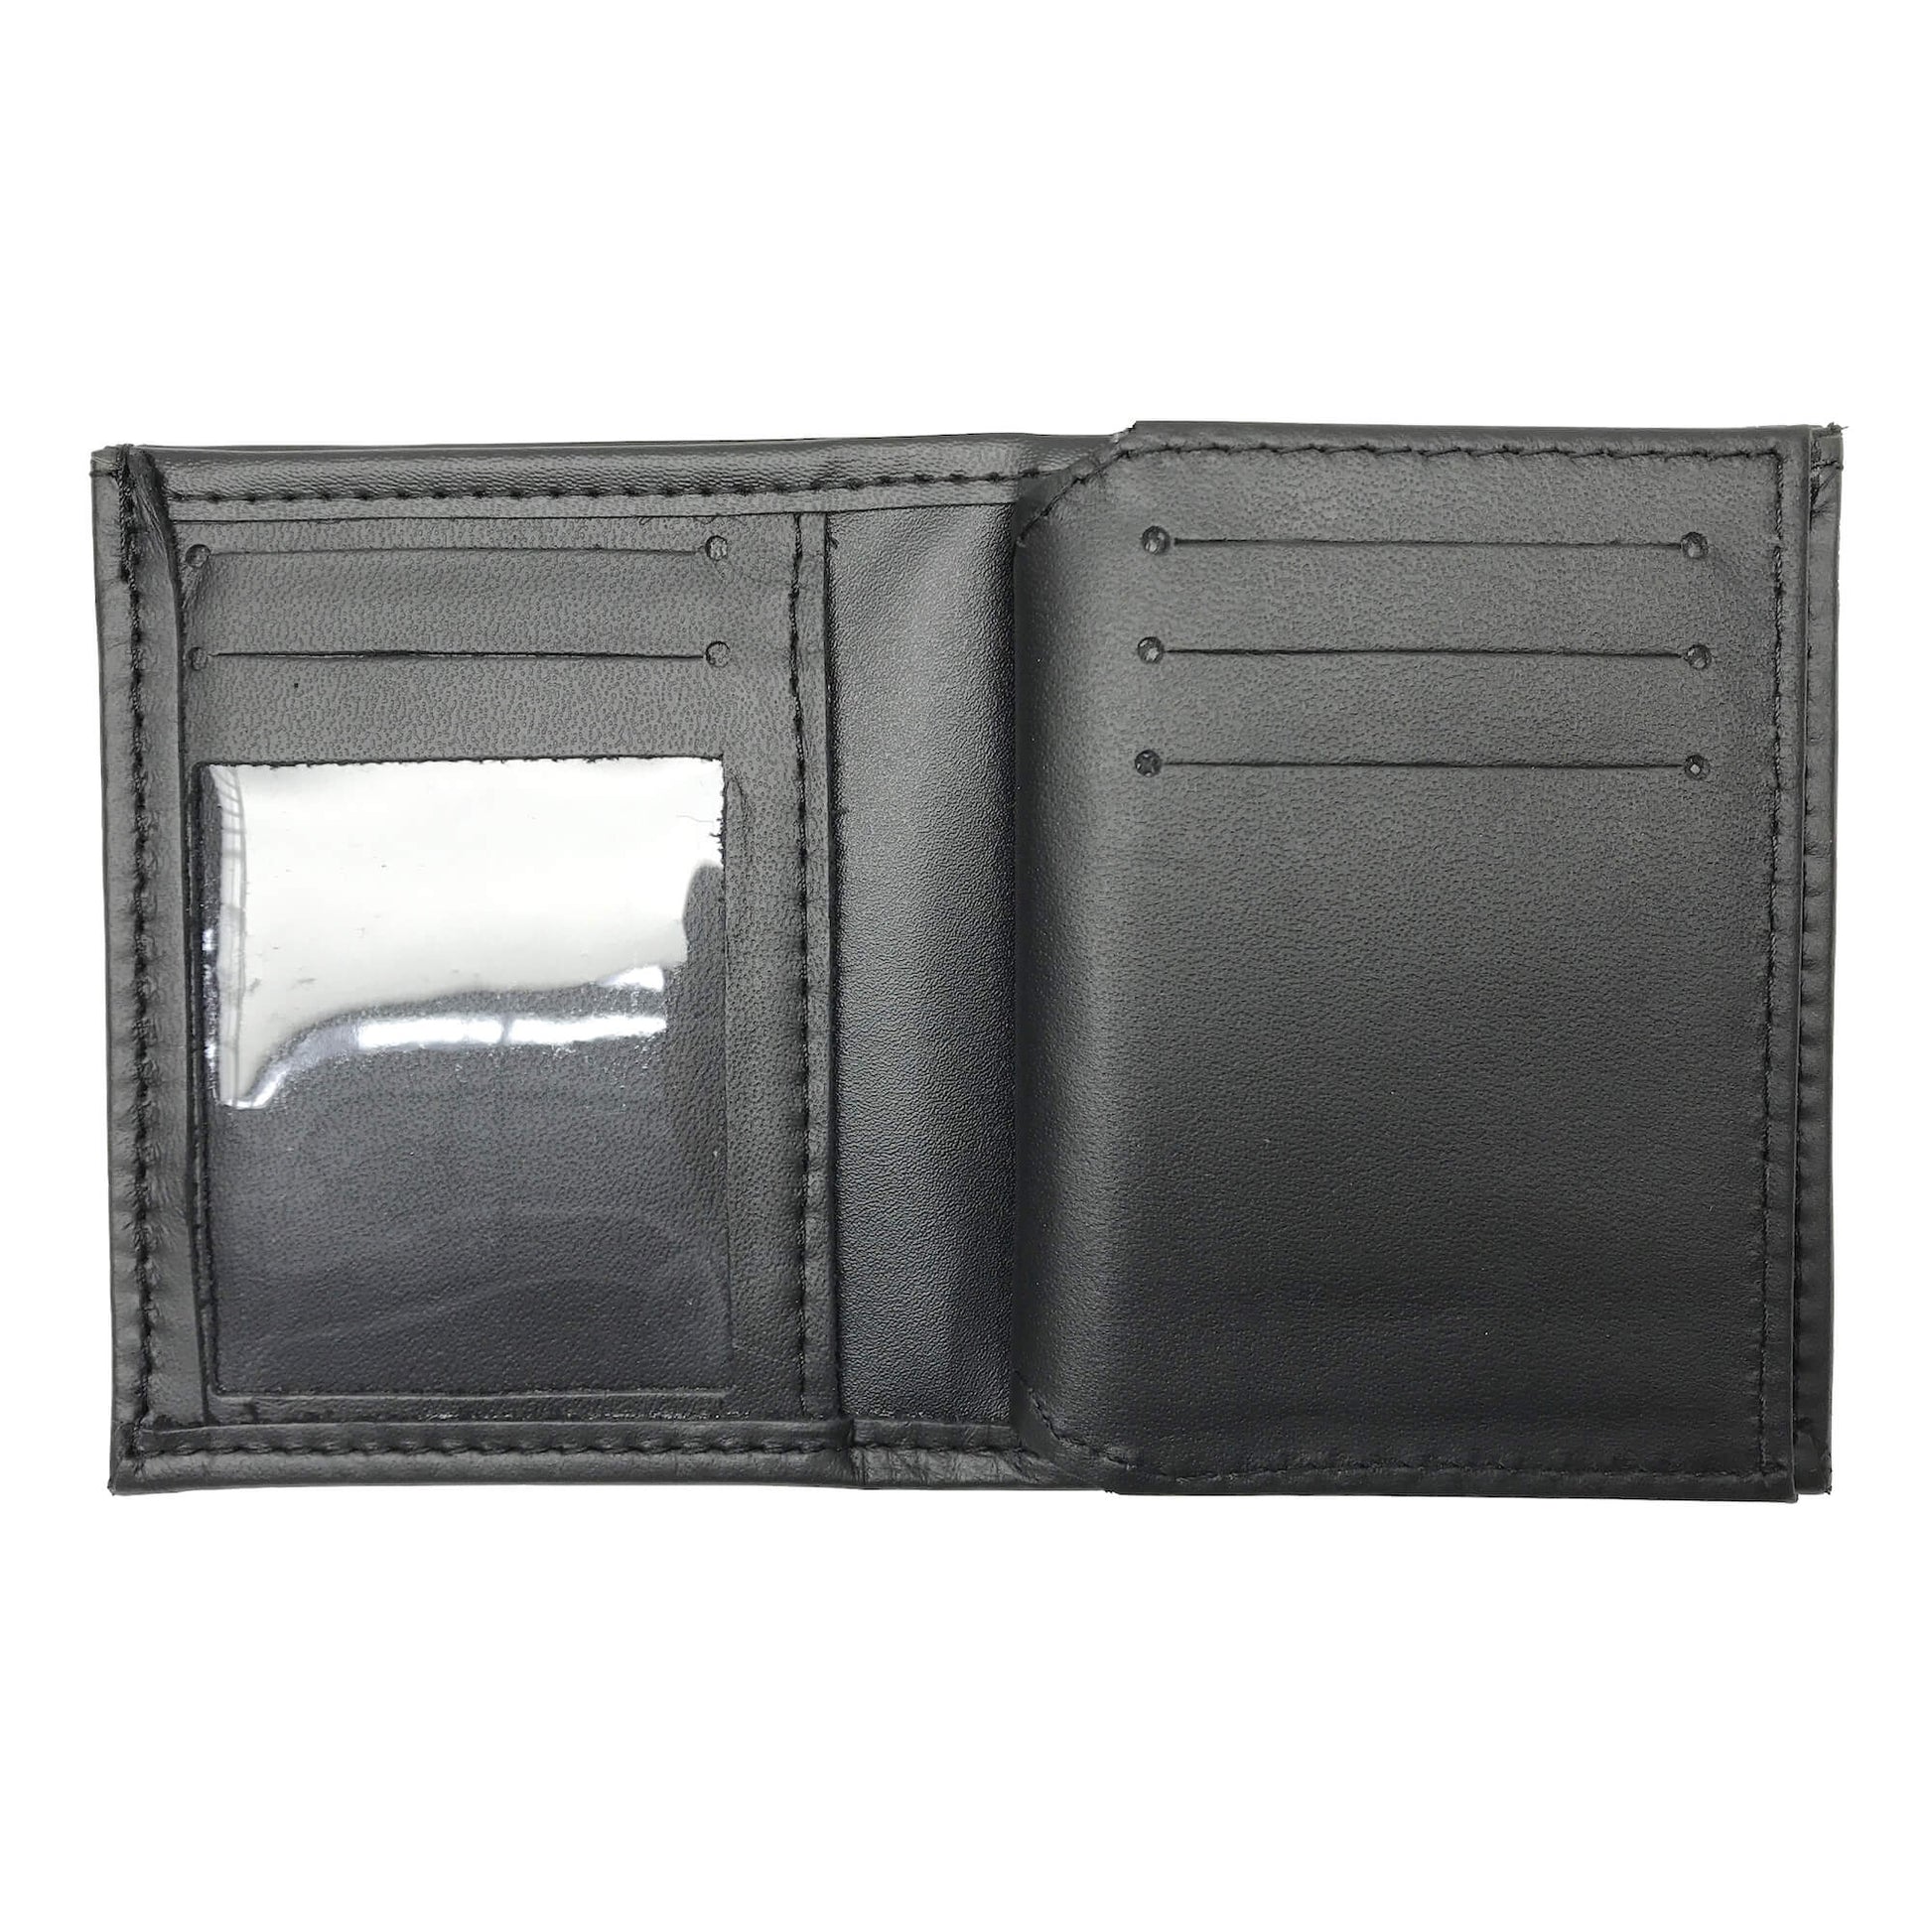 U.S. Department of Homeland Security - DHS (3in) Bifold Hidden Badge Wallet-Perfect Fit-911 Duty Gear USA